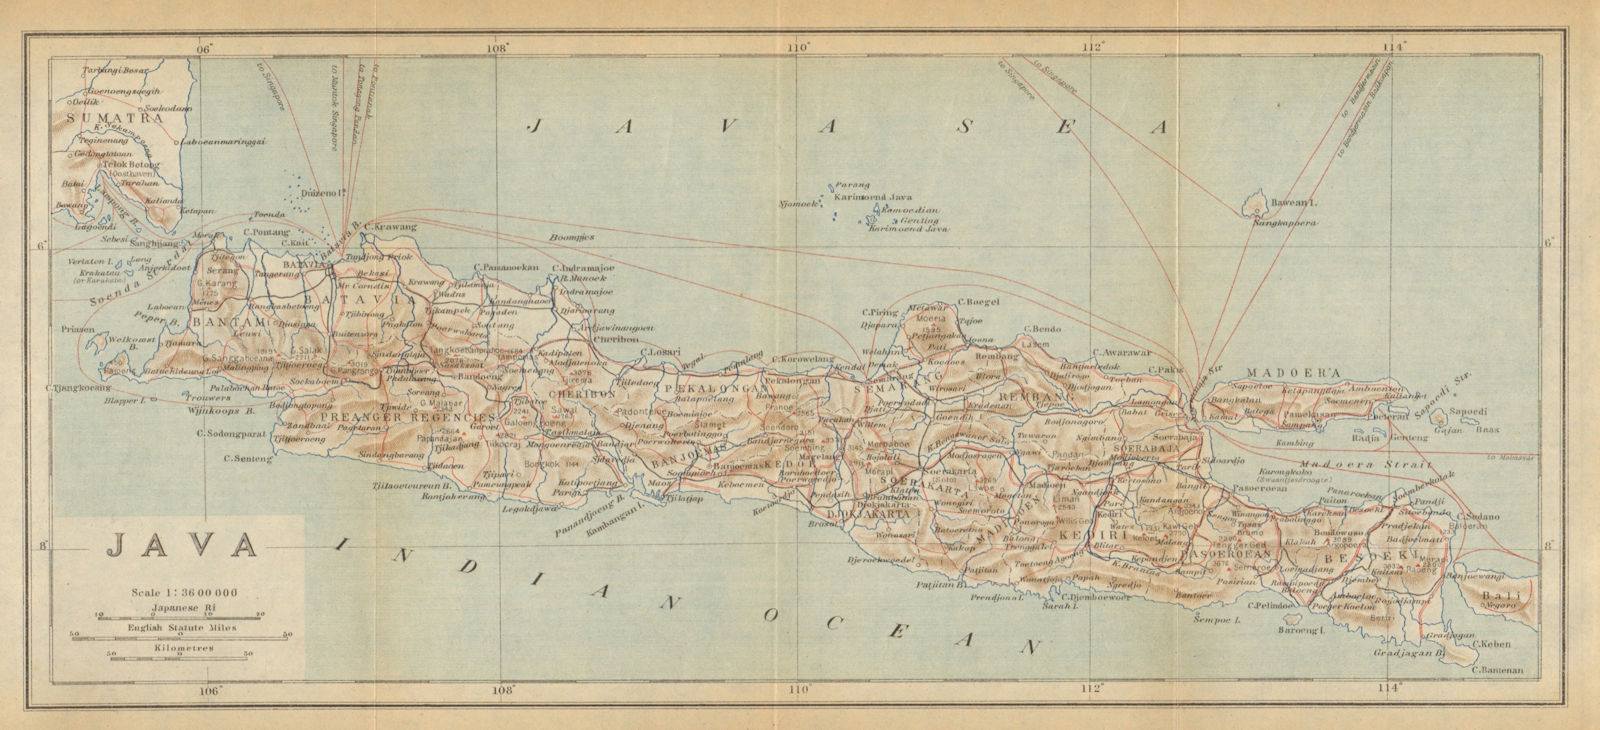 The island of Java. Dutch East Indies. Indonesia 1920 old vintage map chart